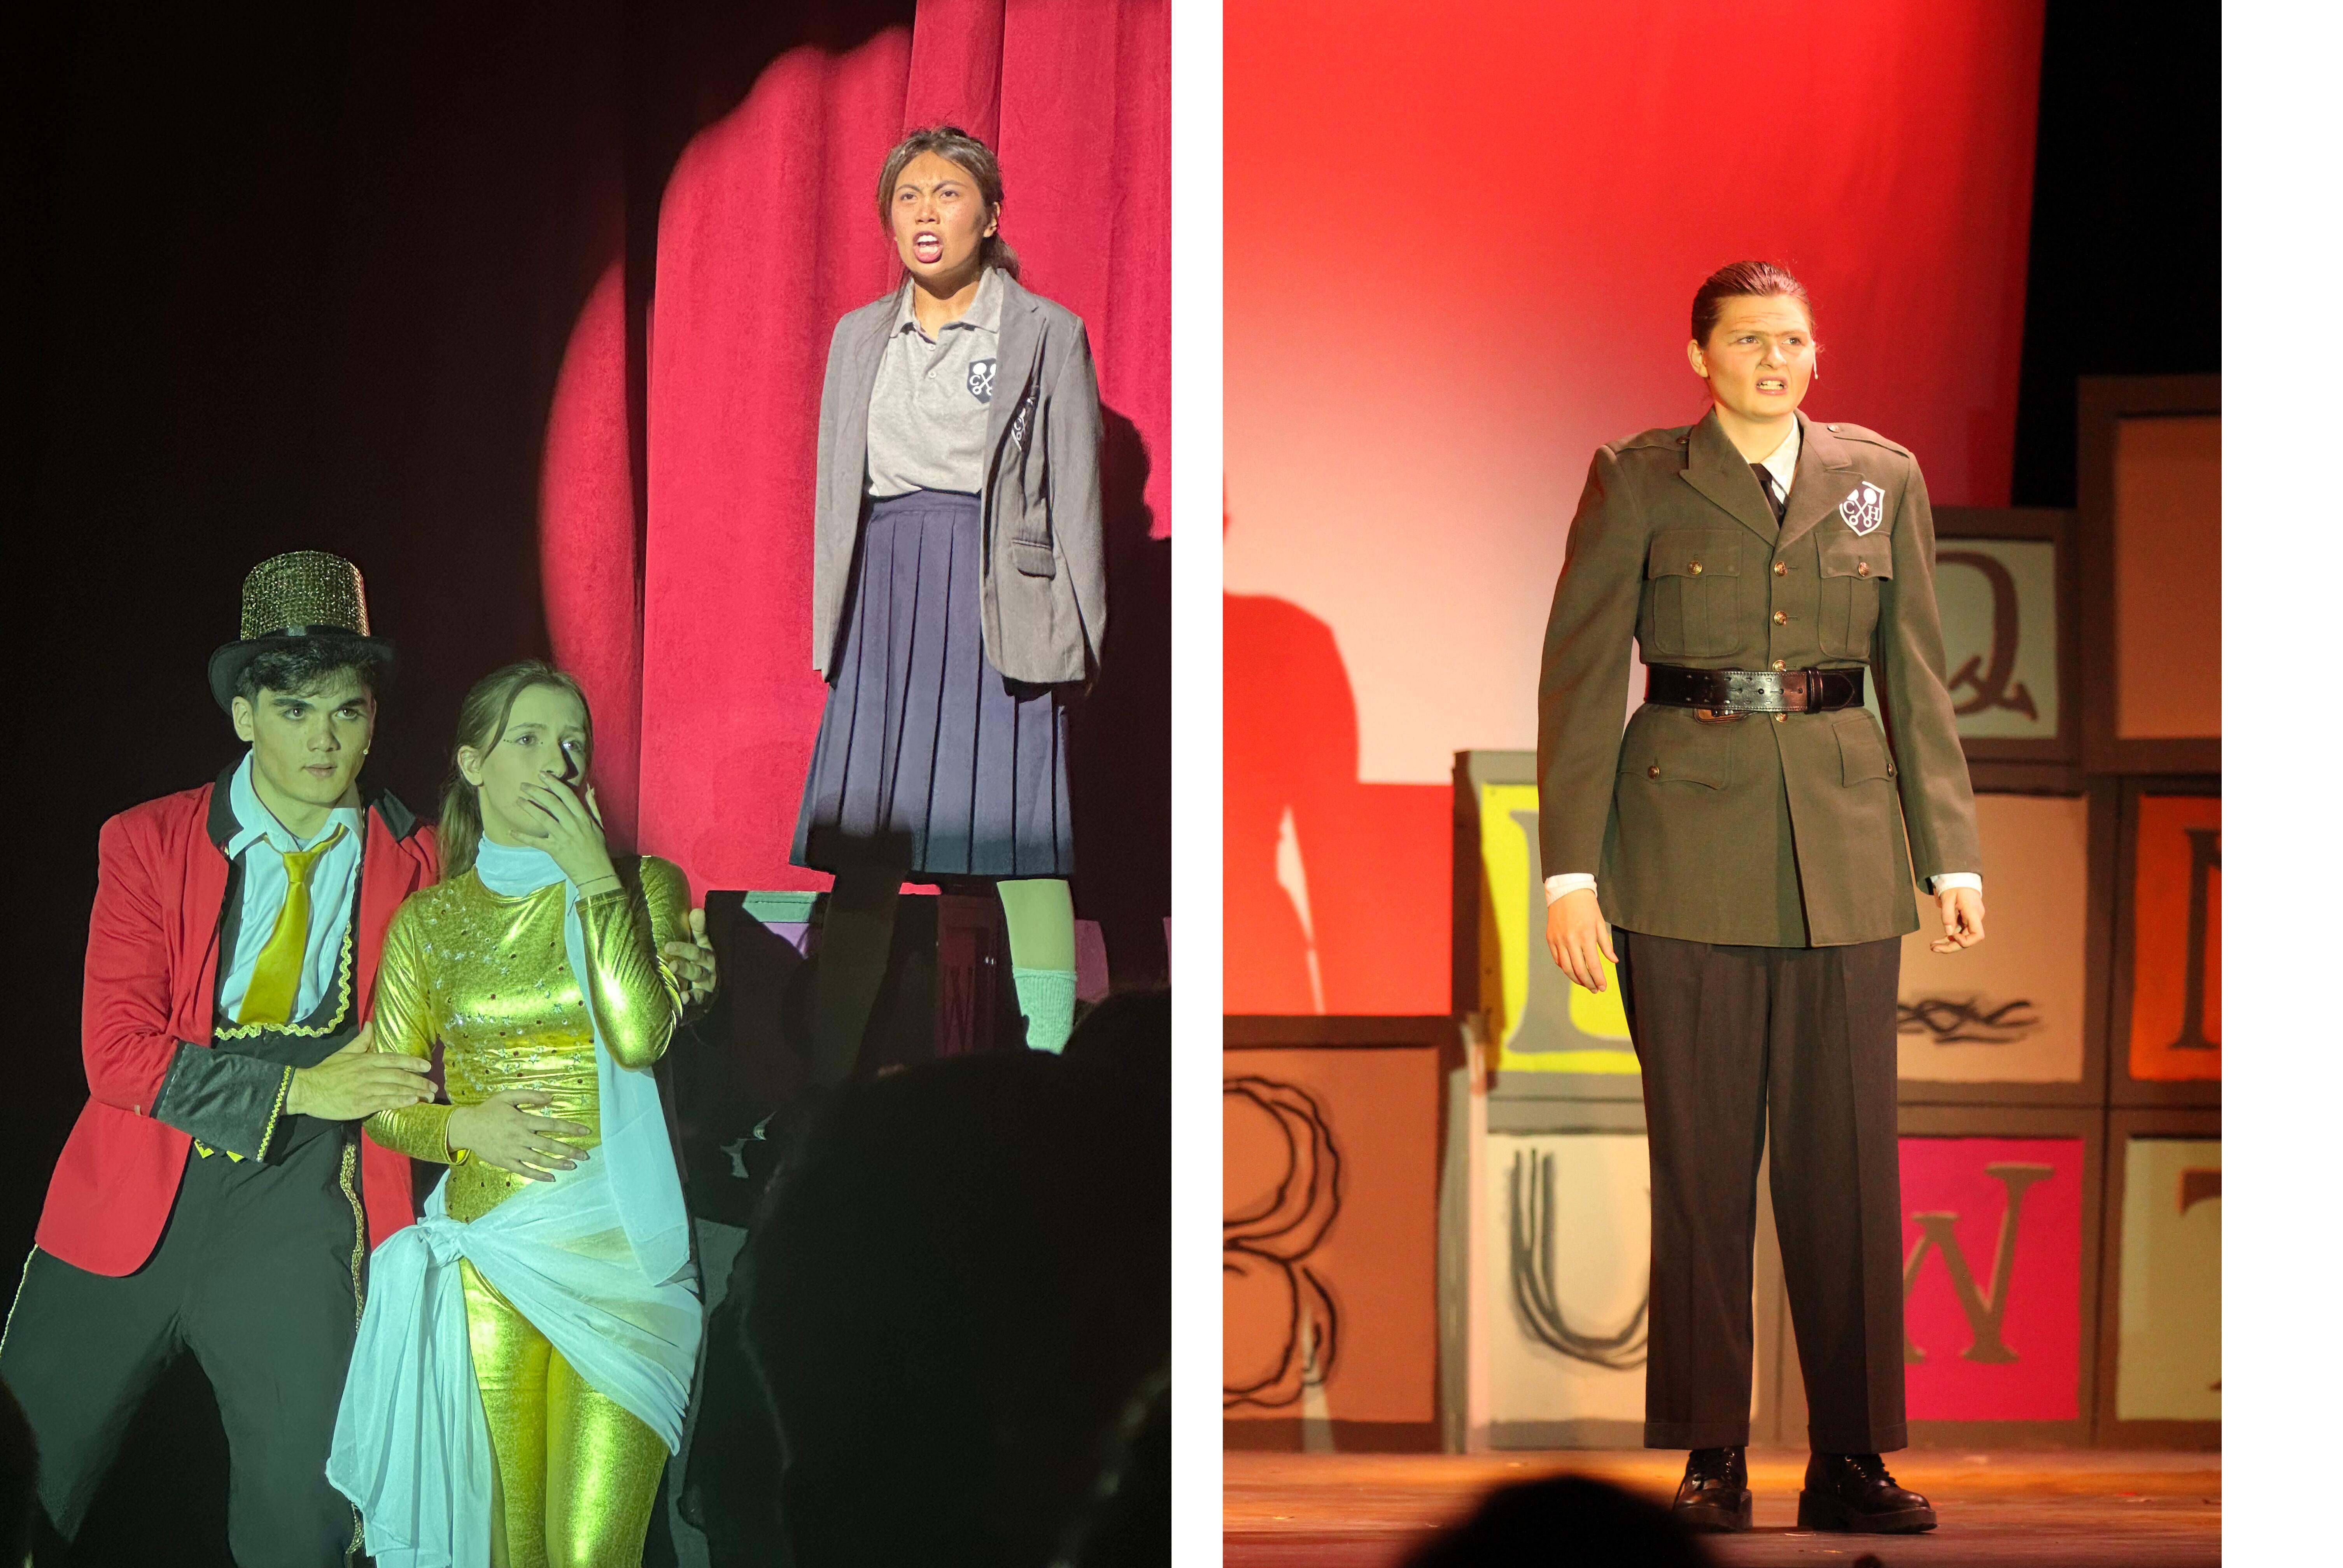 scene of Matilda telling the story of Ms. Honey's parents, who are also on stage, and a scene with Ms. Trunchbull